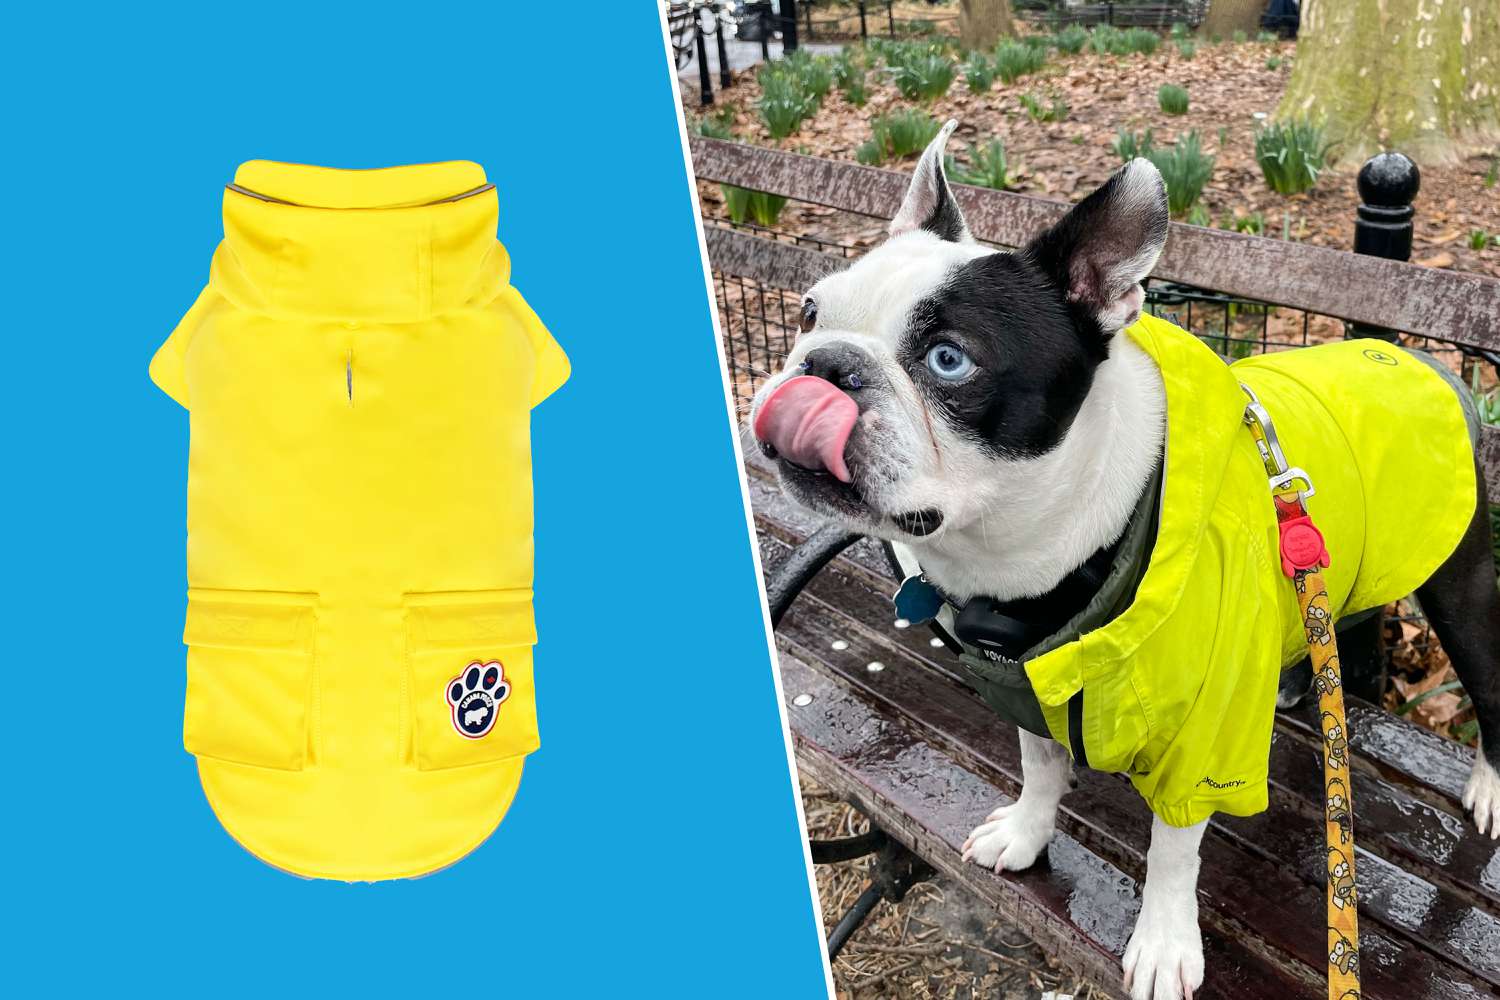 The Best Dog Raincoats in a collage format